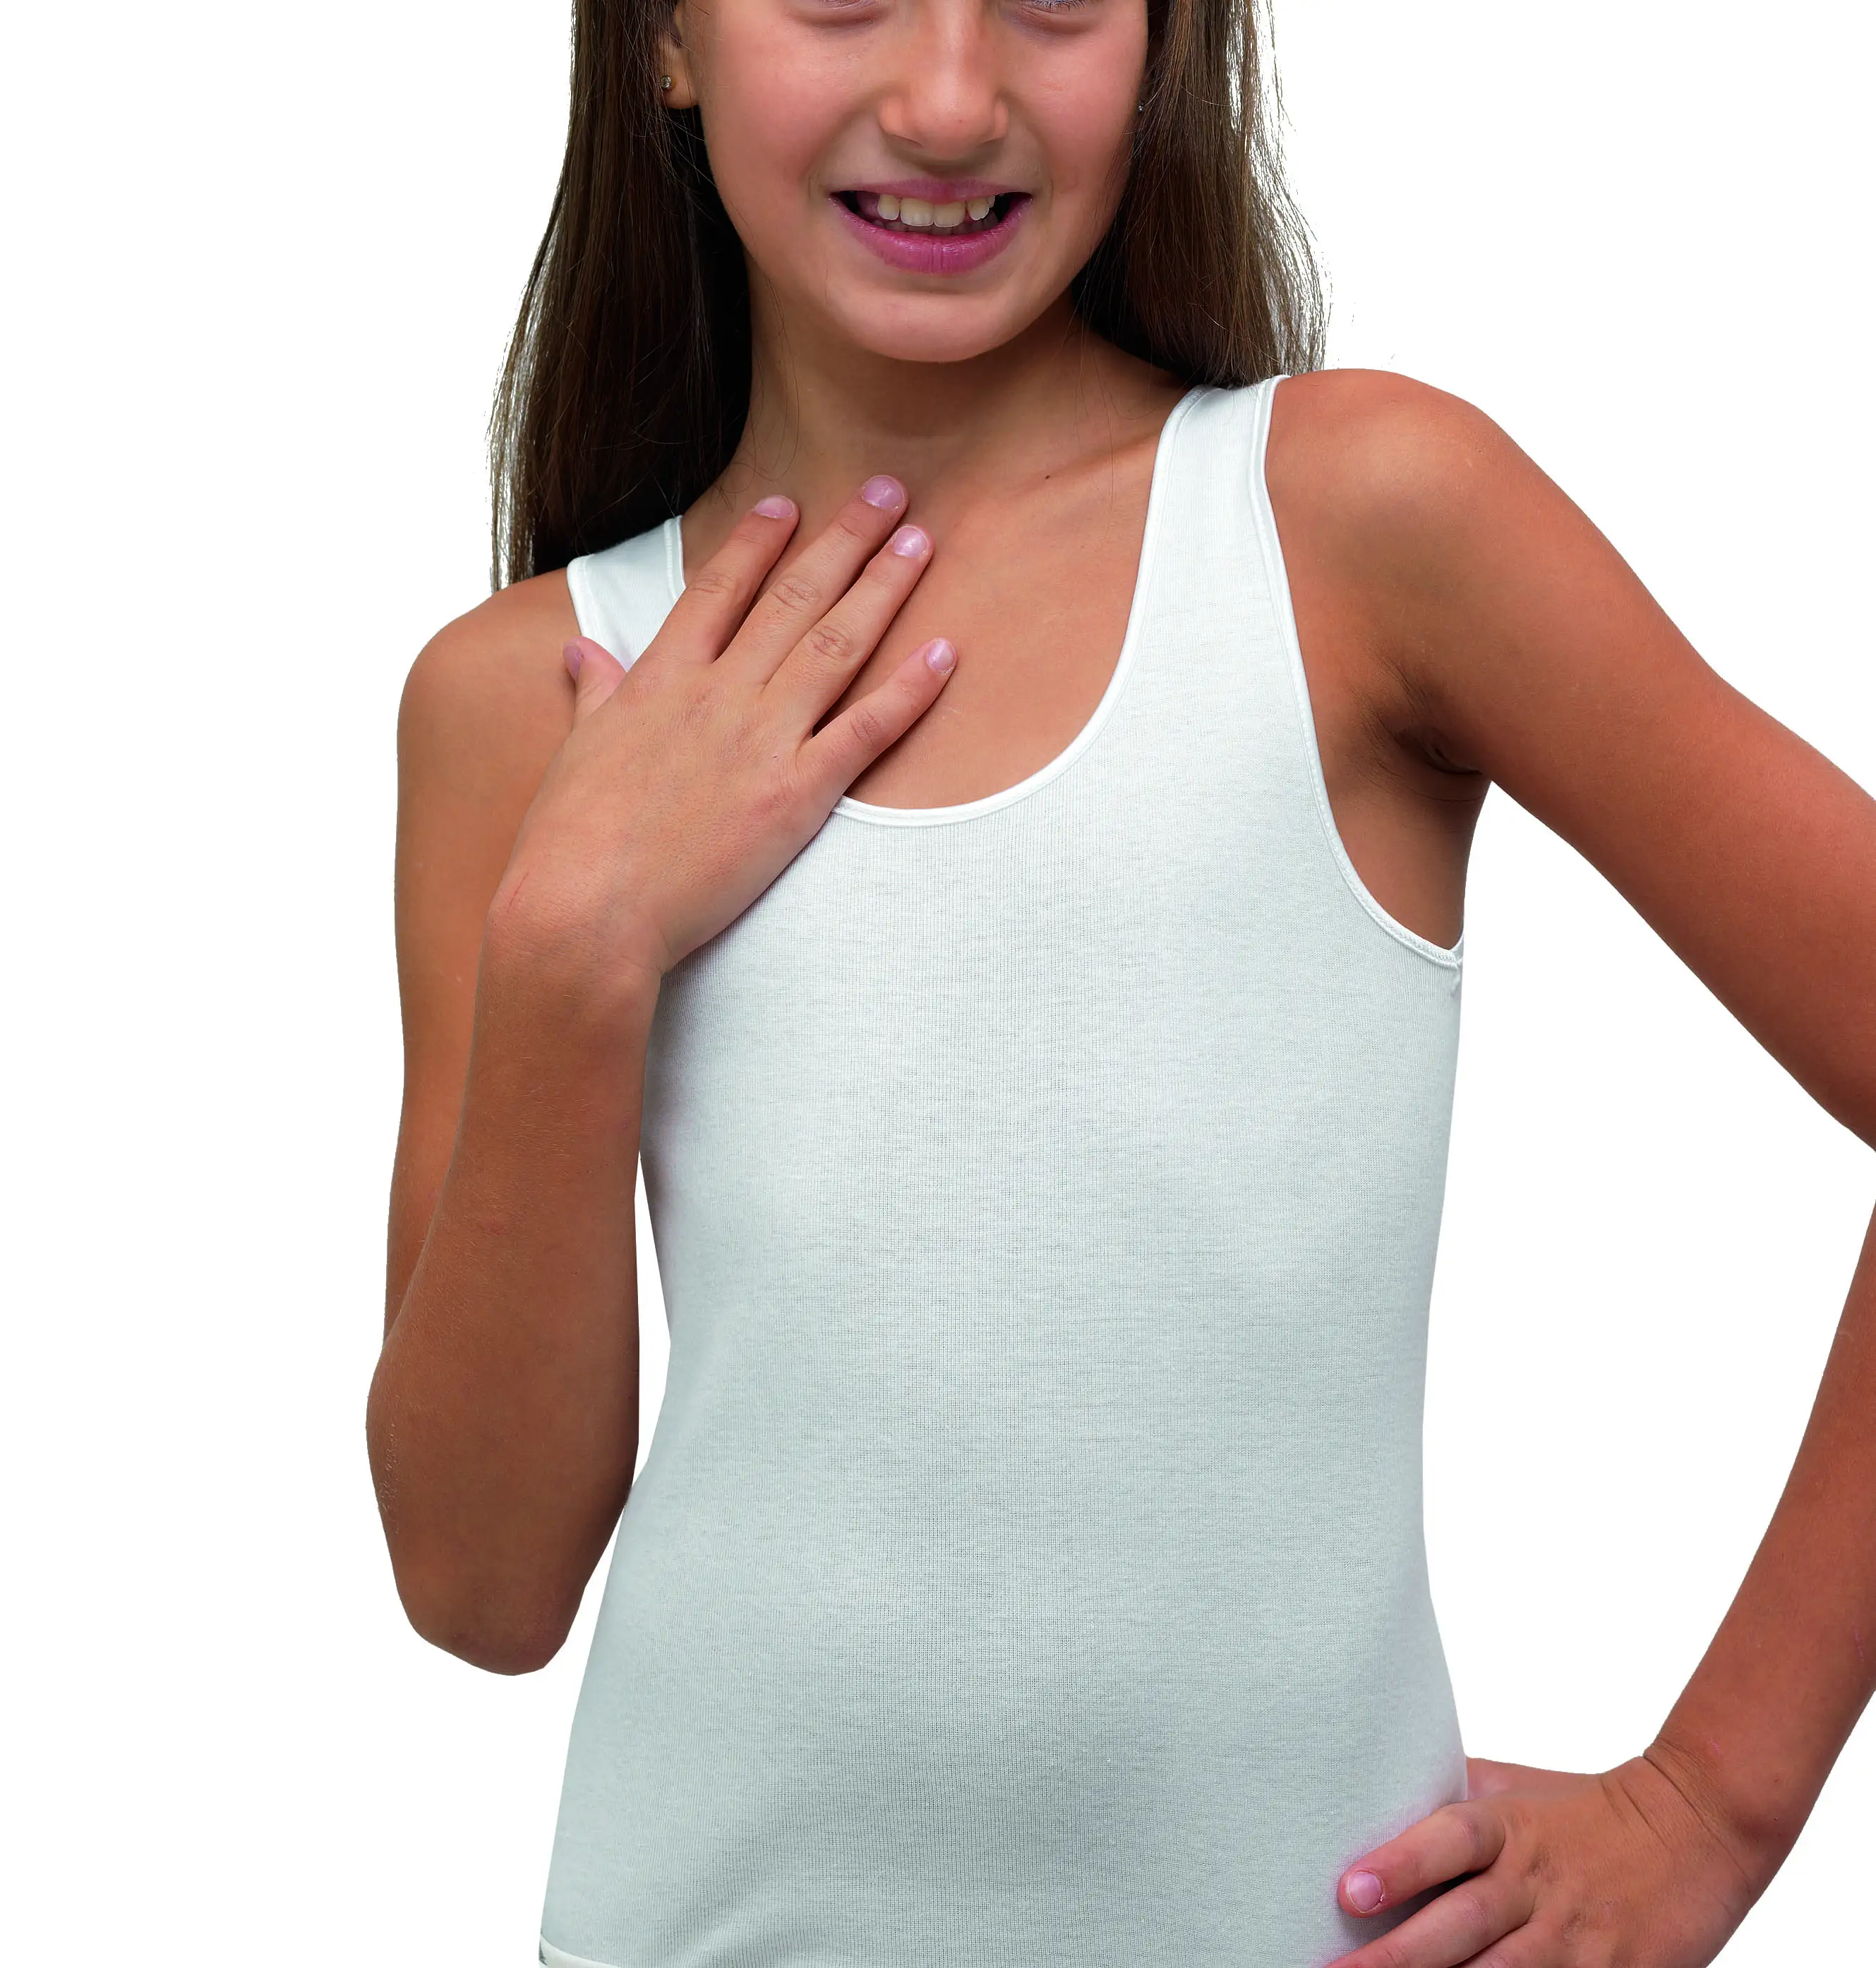 Made In Italy - Wide Shoulders Girl's Undershirt Tank Top With Satin ...